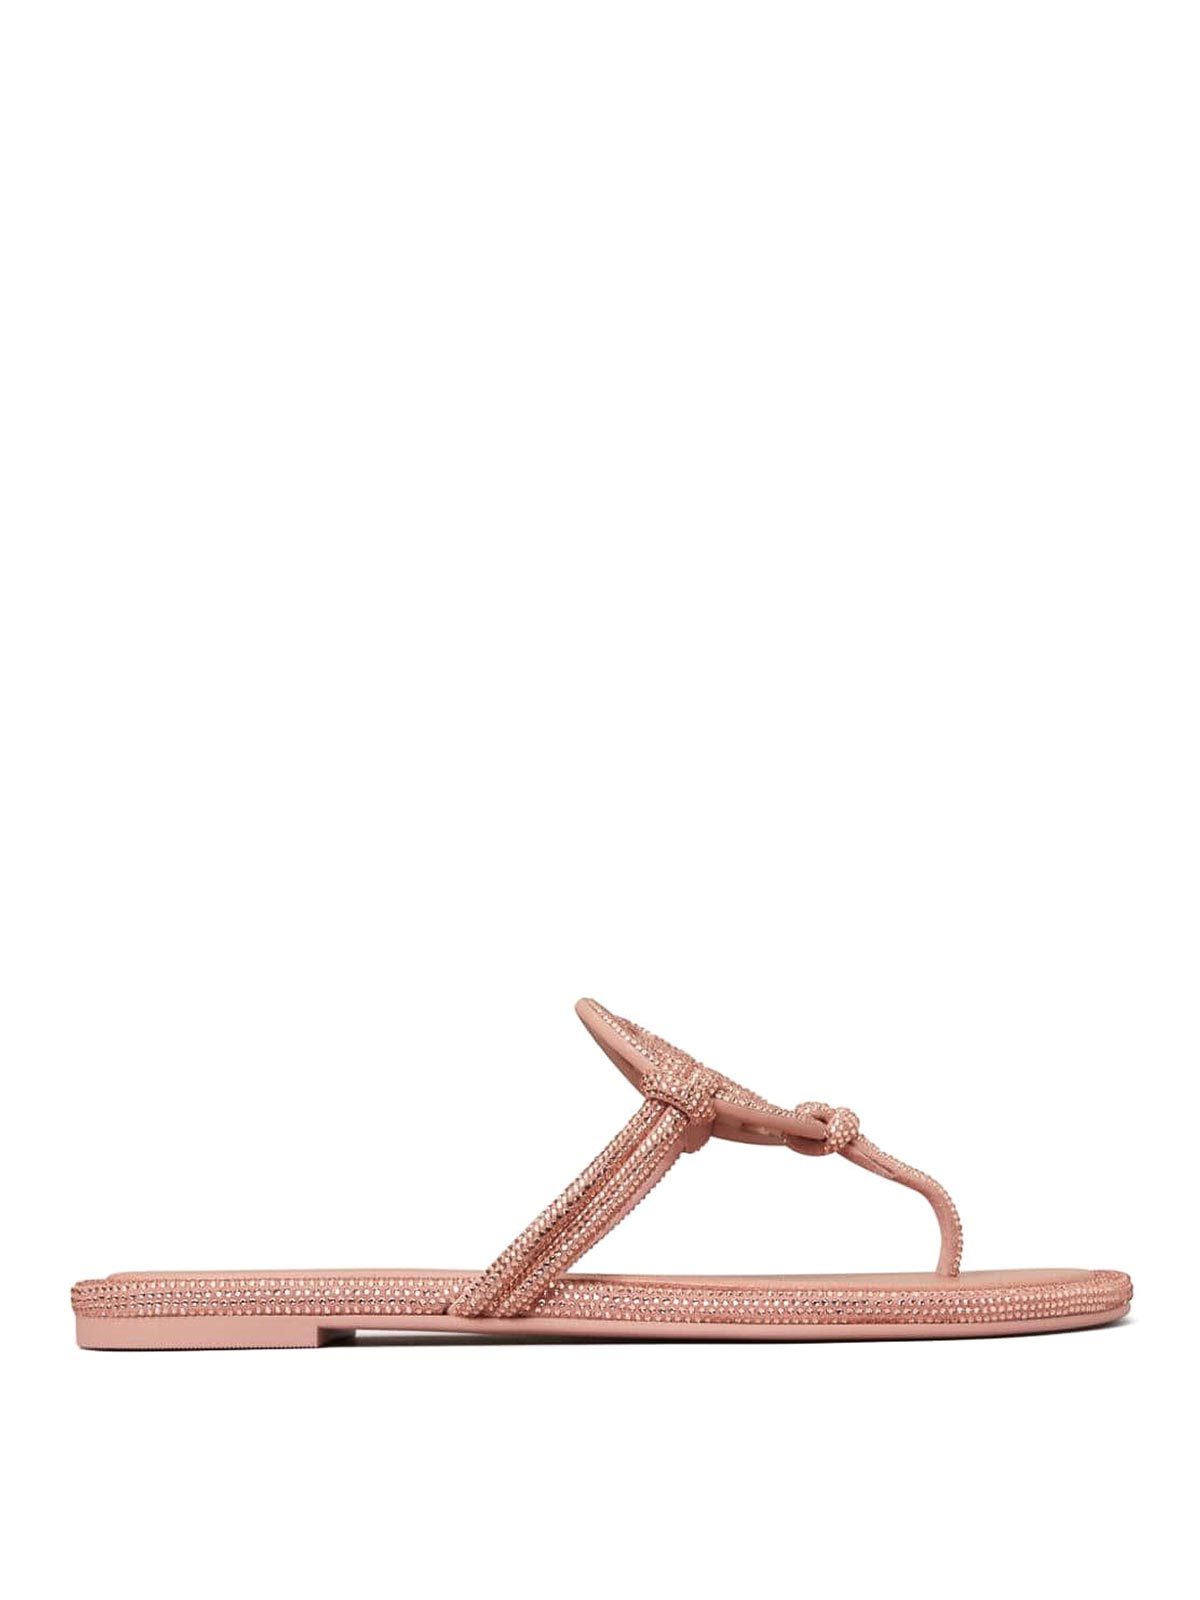 Tory Burch Miller Leather Thong Sandals In Color Carne Y Neutral